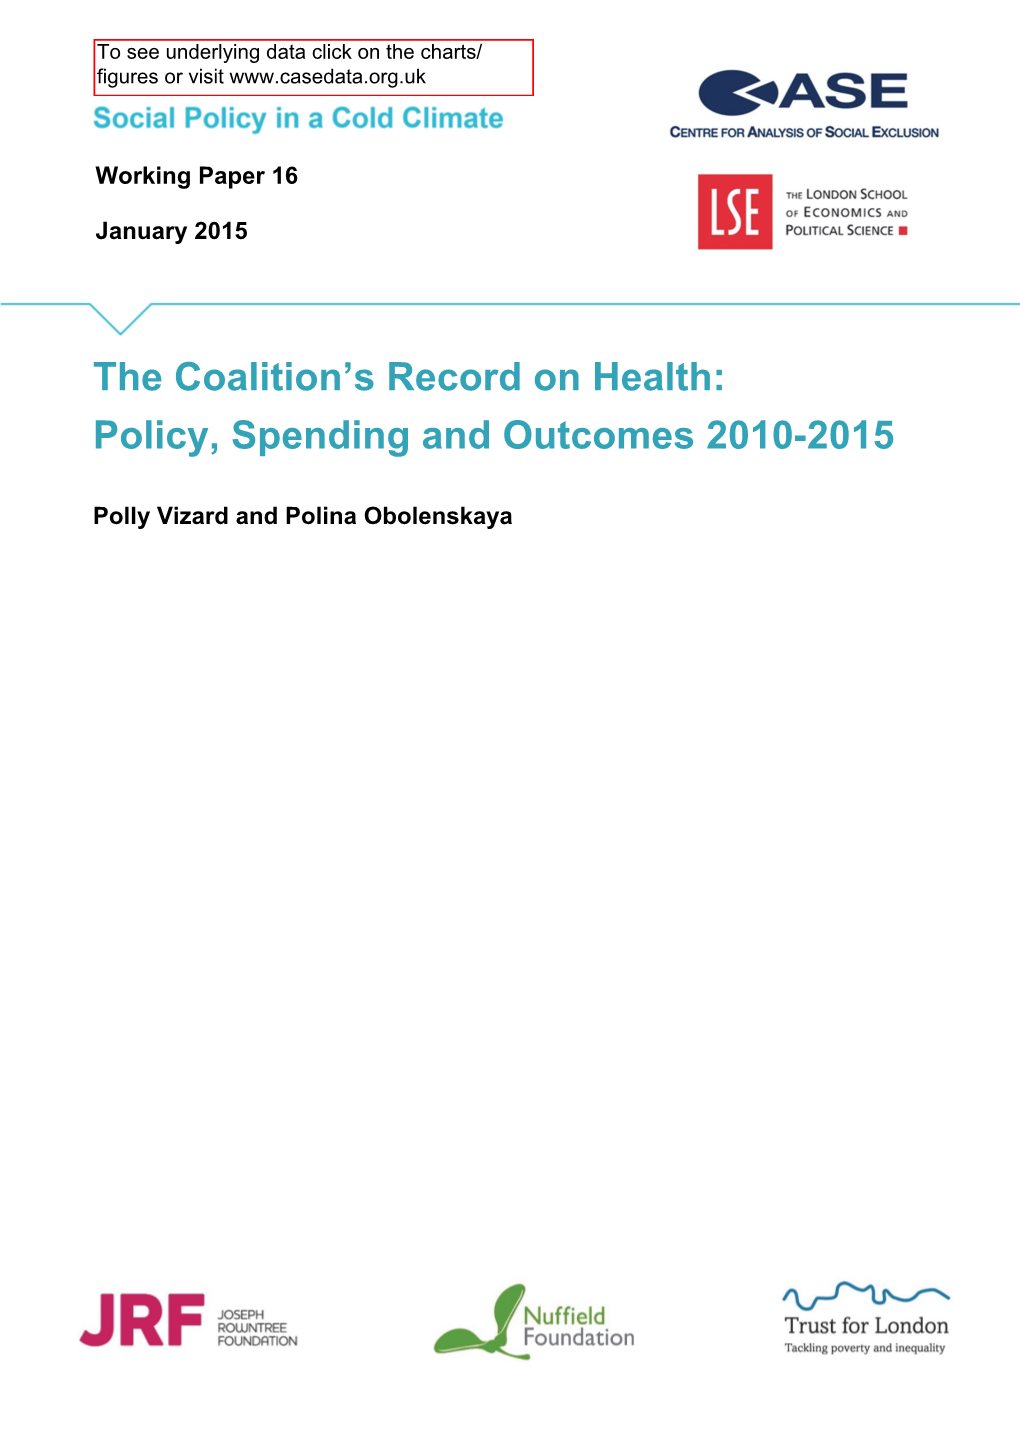 The Coalition's Record on Health